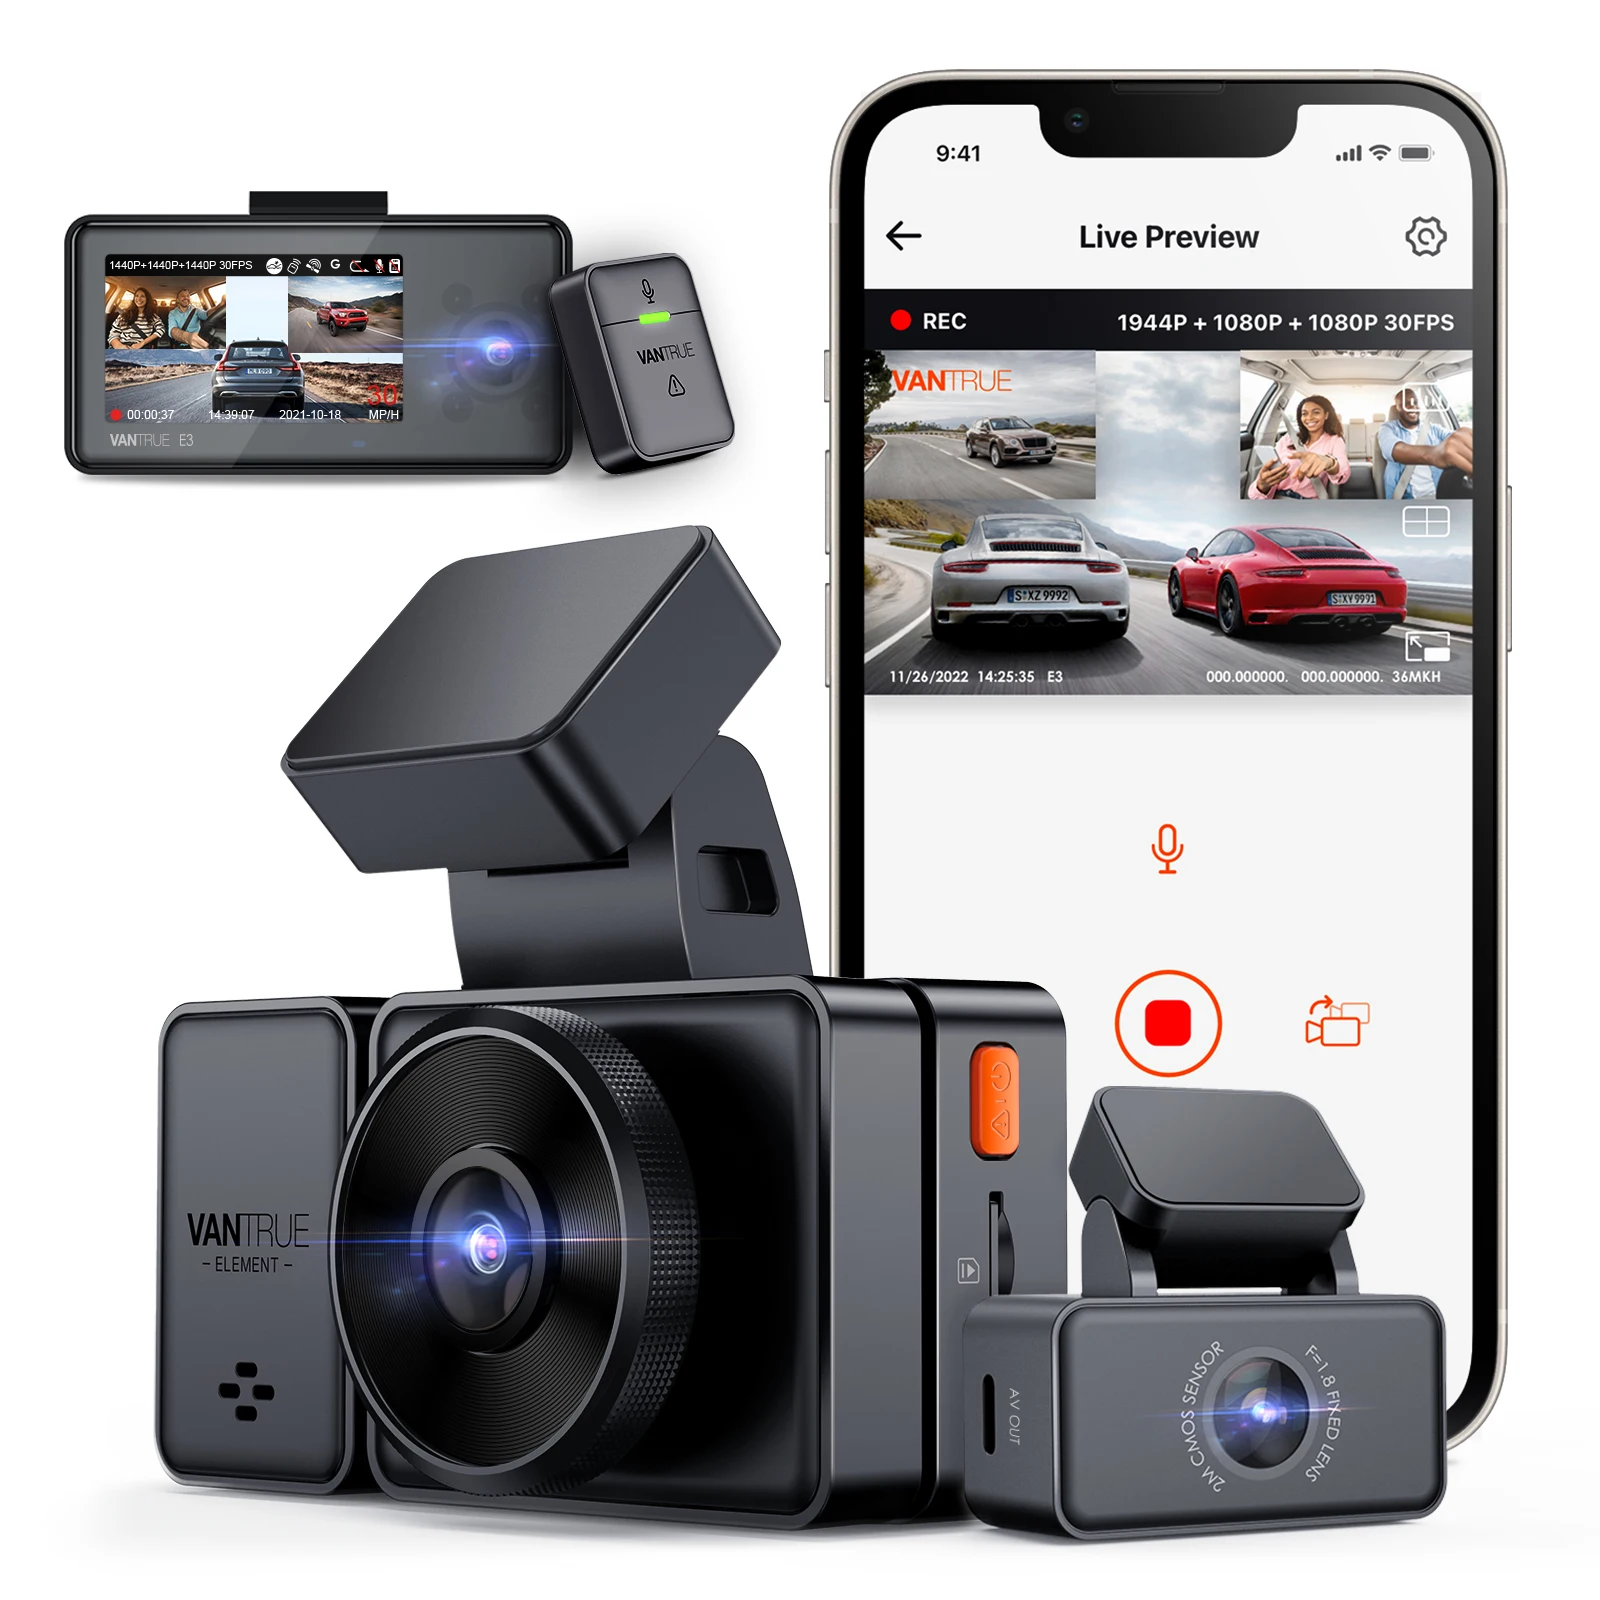 Vantrue E3 3 Channel Dash Cam 2.5K Front and Rear Inside Built-in WiFi GPS,Car Camera with Voice Control